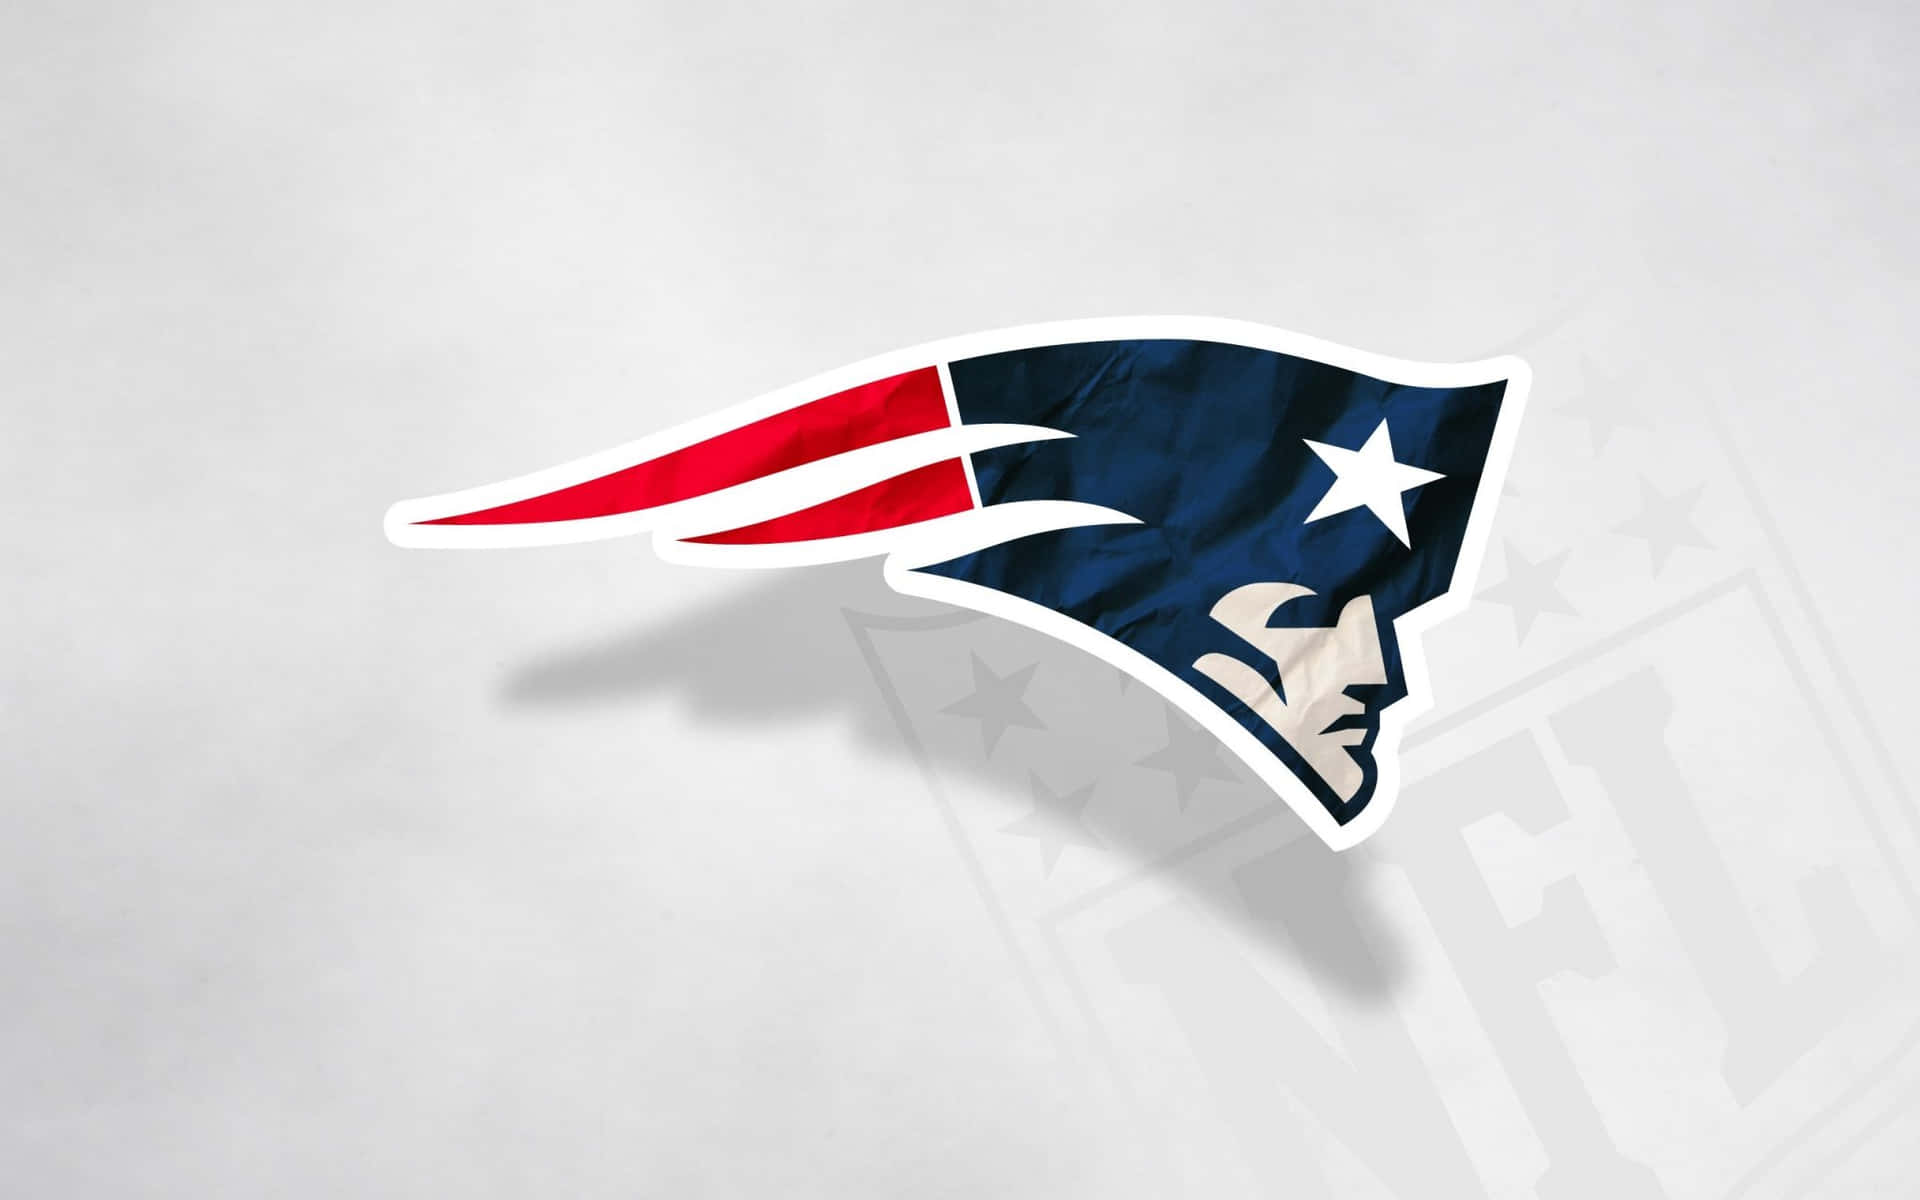 Let's all get behind the Patriots, proudly show your team spirit with this vibrant desktop wallpaper. Wallpaper